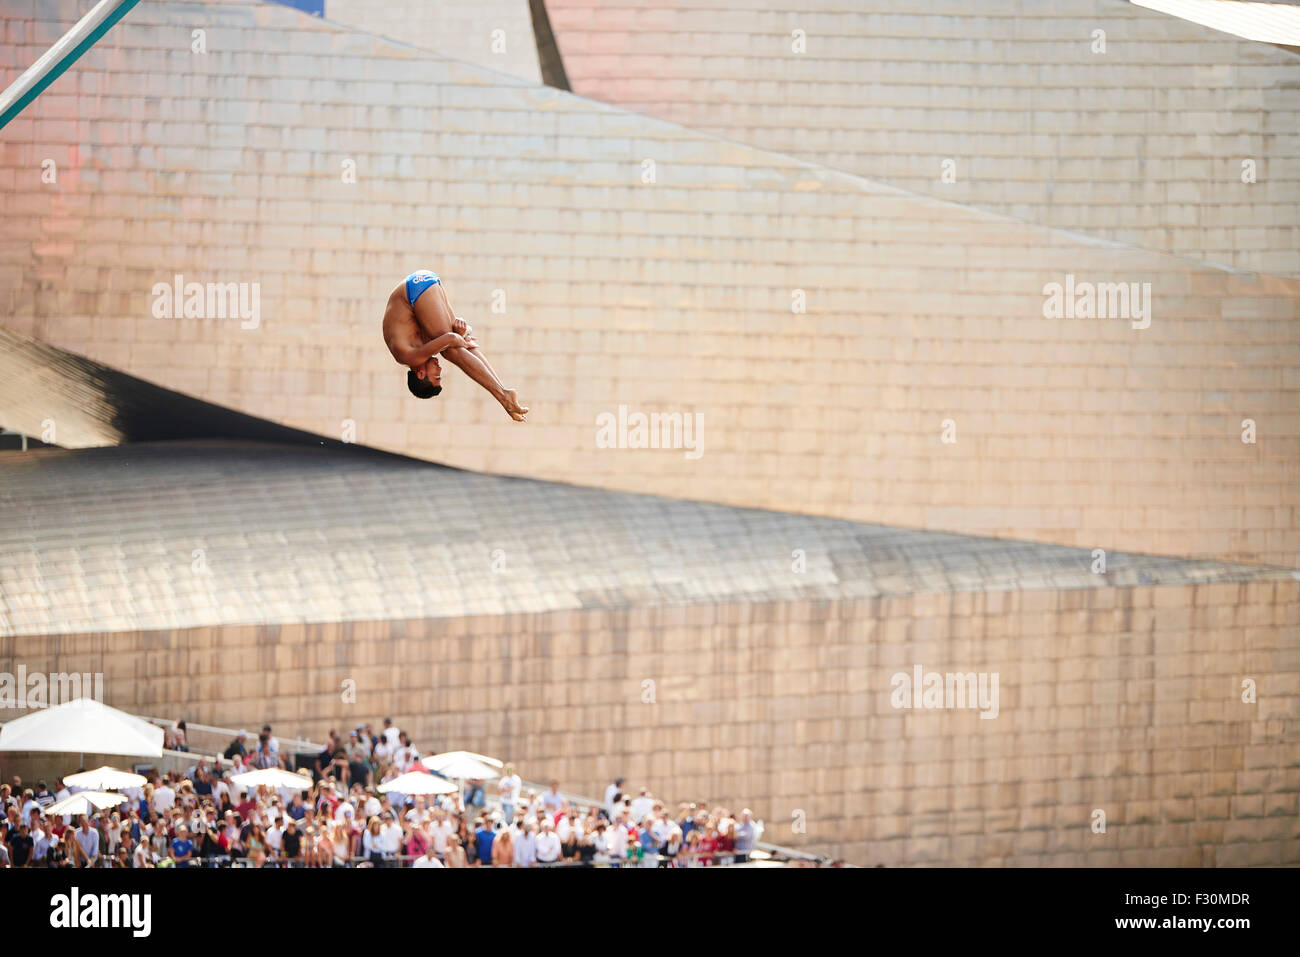 Miguel Garcia in the Red Bull Cliff Diving Bilbao 2015 Stock Photo